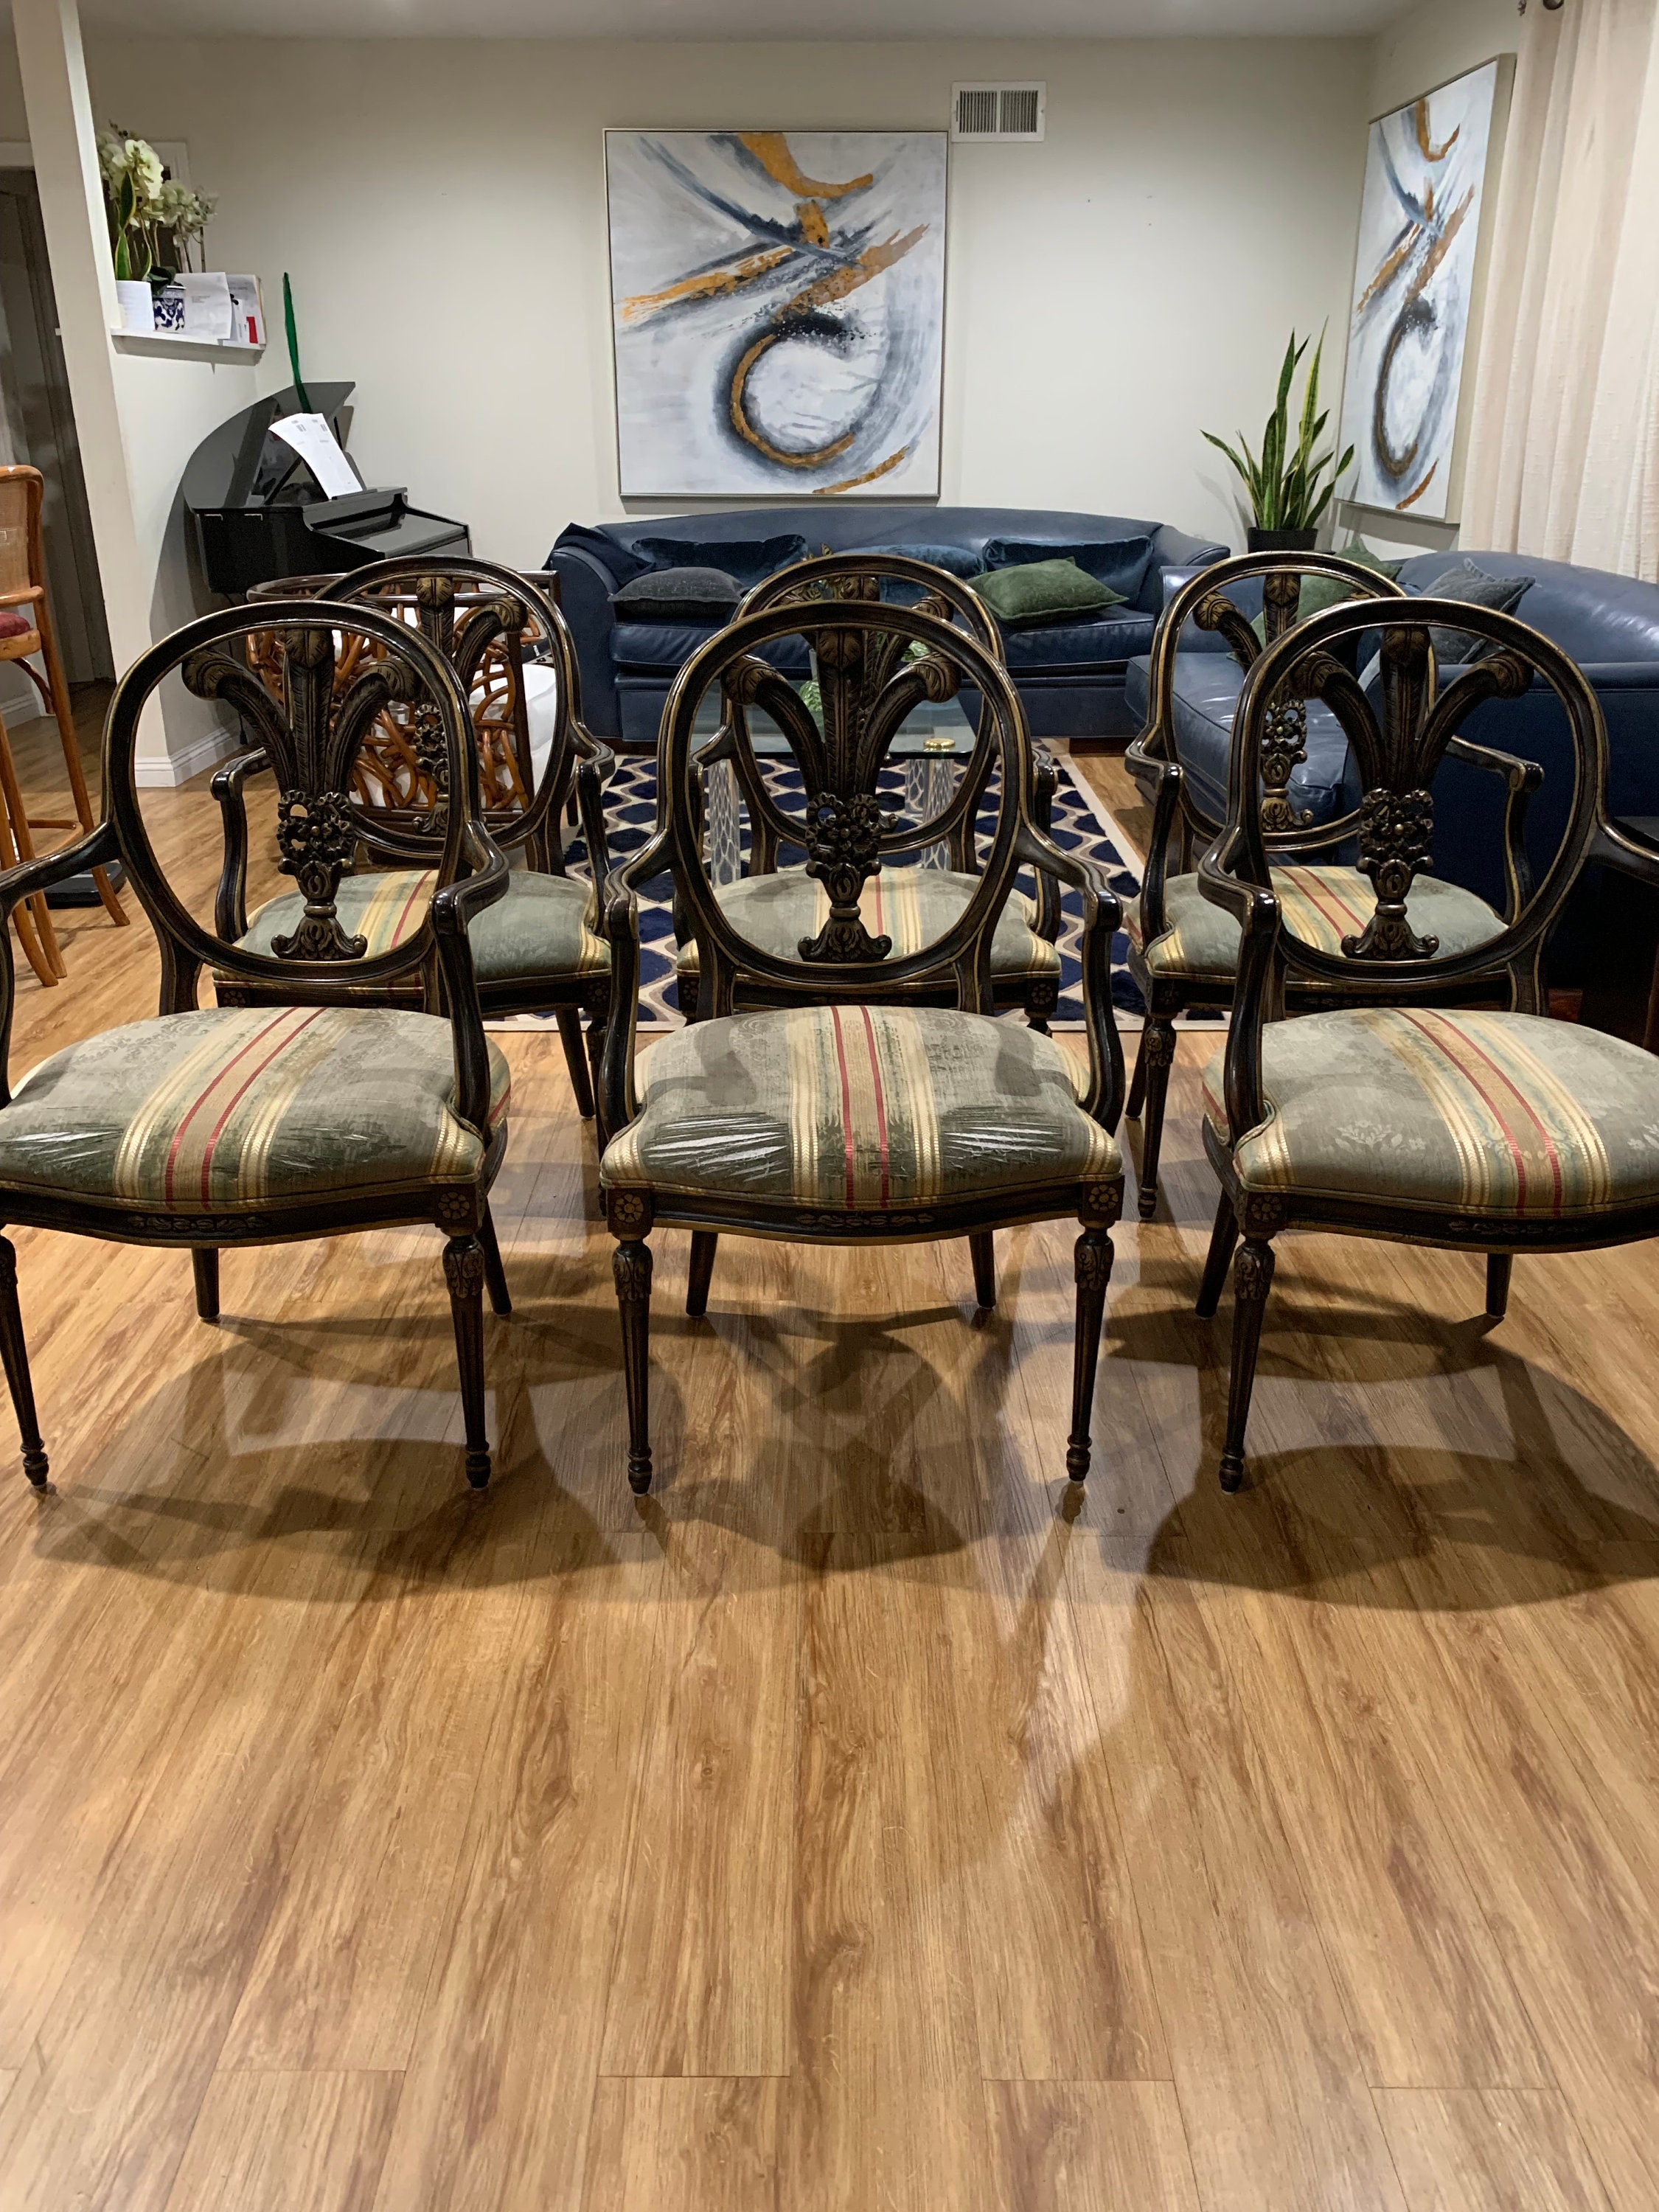 Louis Chairs 8 Dining Chairs - 84 For Sale on 1stDibs  king louie chair, king  louis chairs for sale, king louis dining room chairs